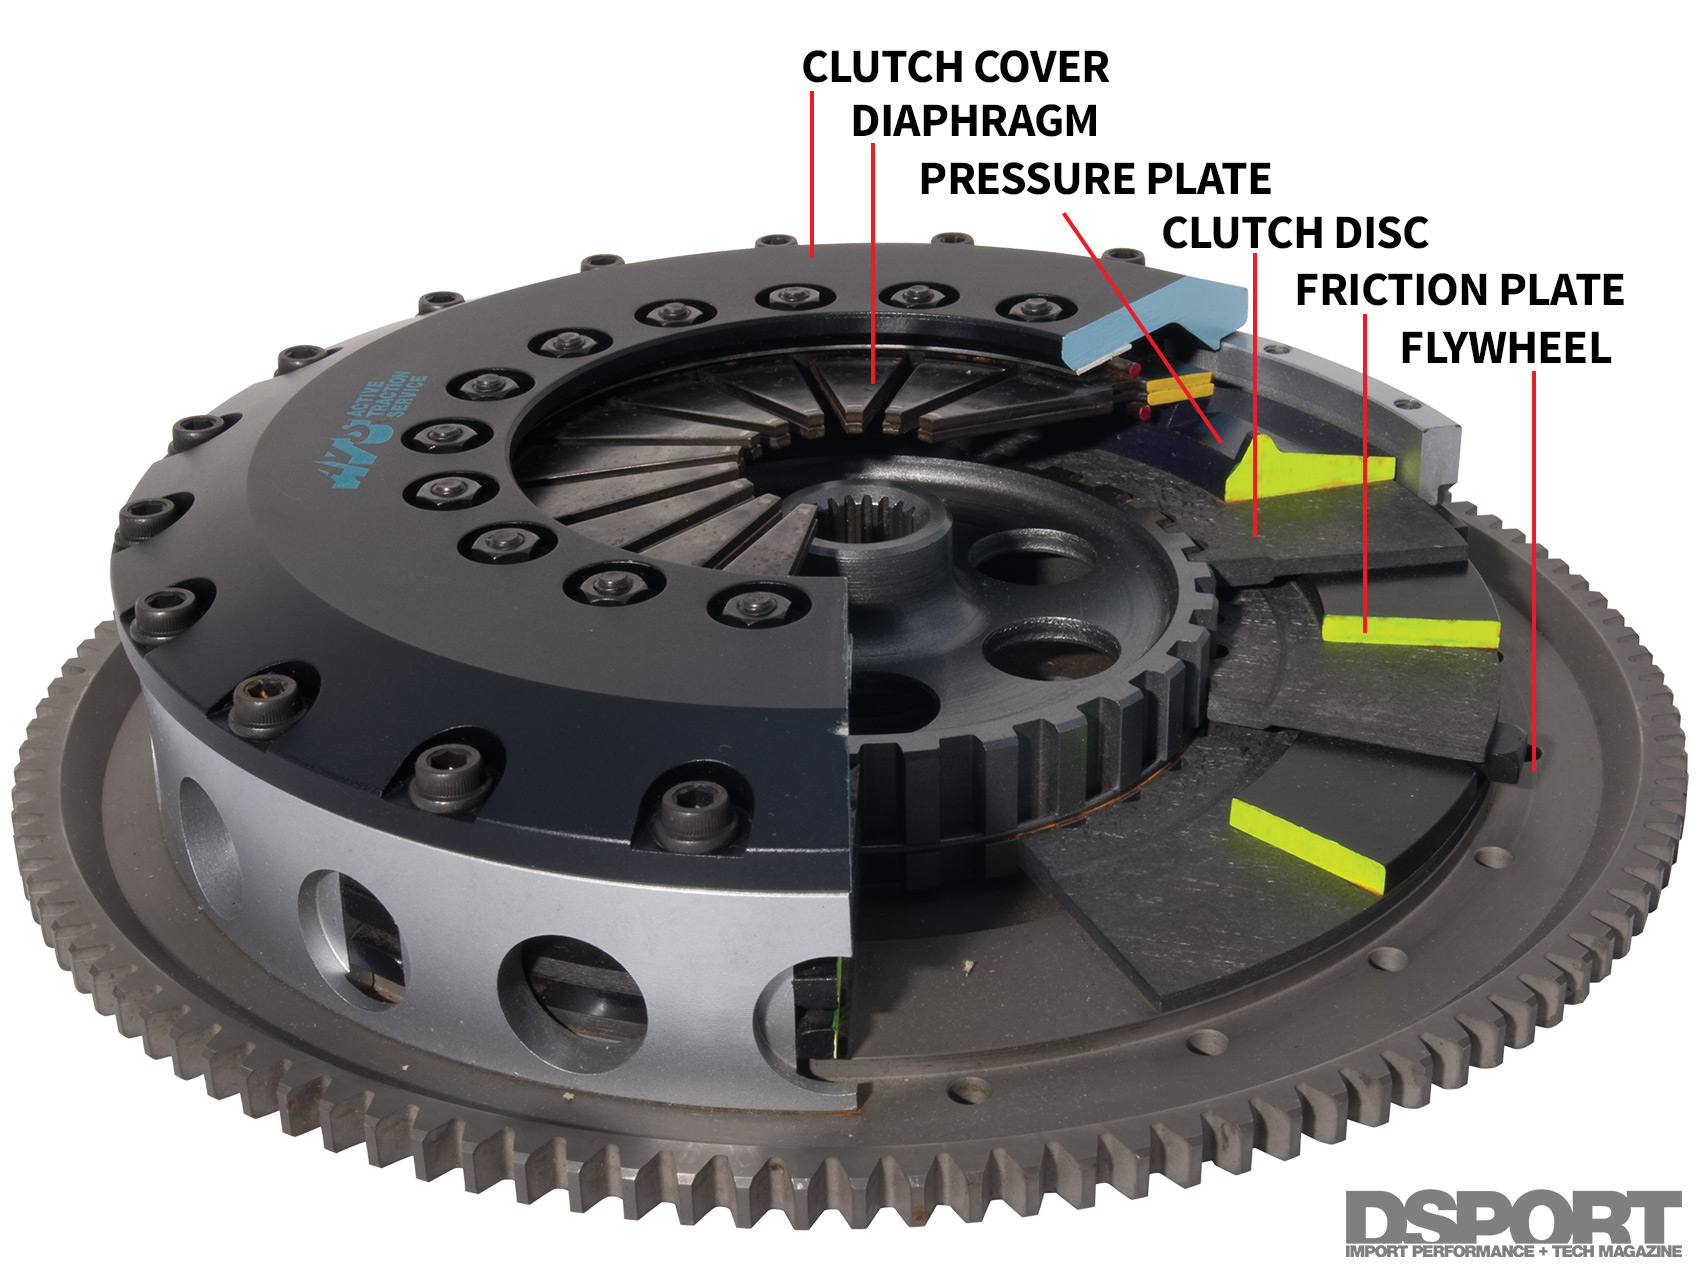 Clutch 101: Getting a Grip on Performance Clutches